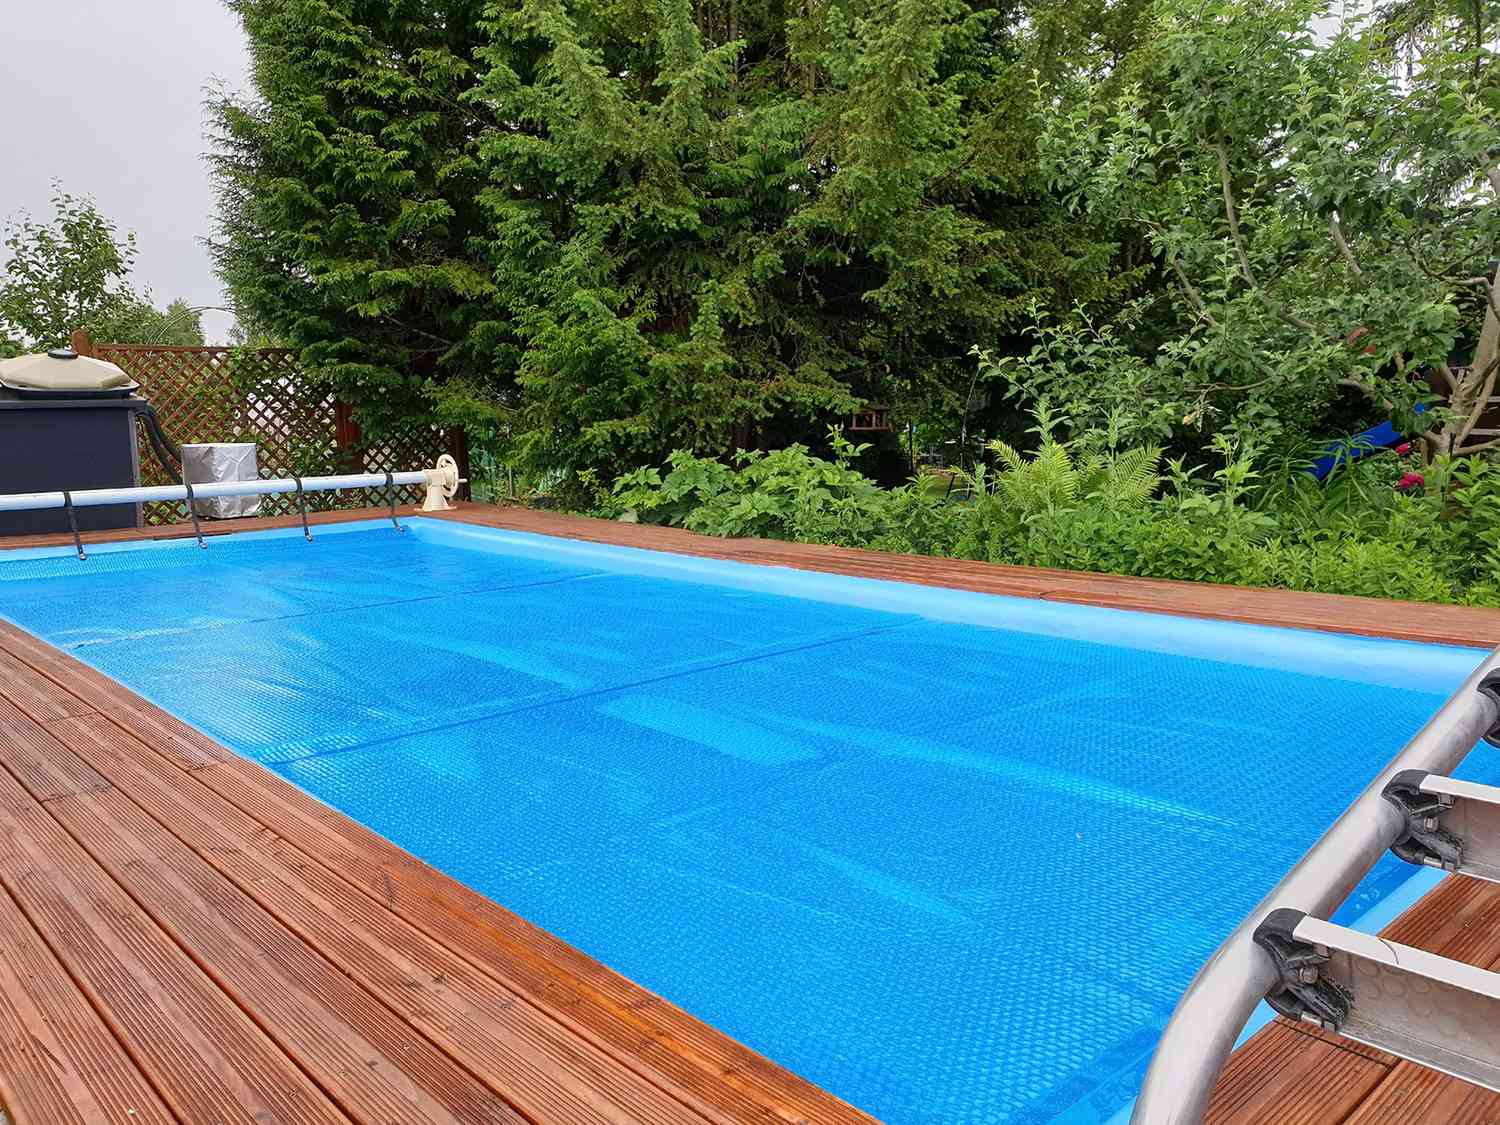 Pool Covers: Thorough Communication is Key to Ensuring a Satisfactory  Install  Pool & Spa News